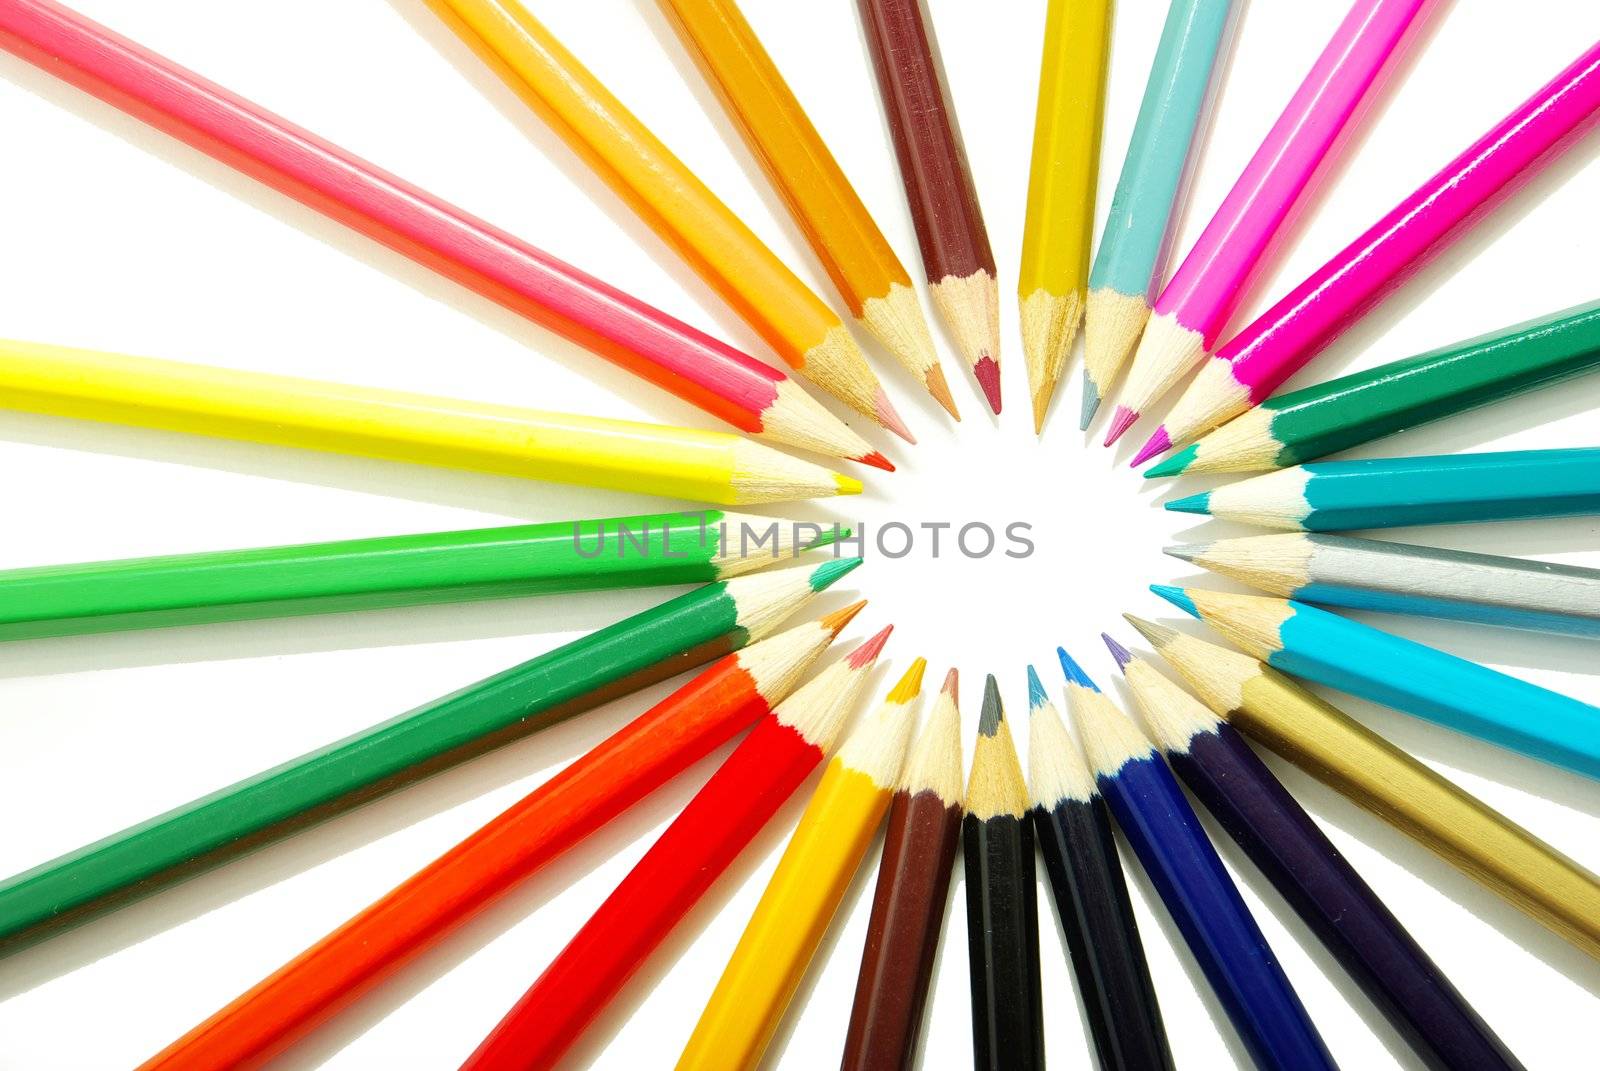  Assortment of coloured pencils  on white background